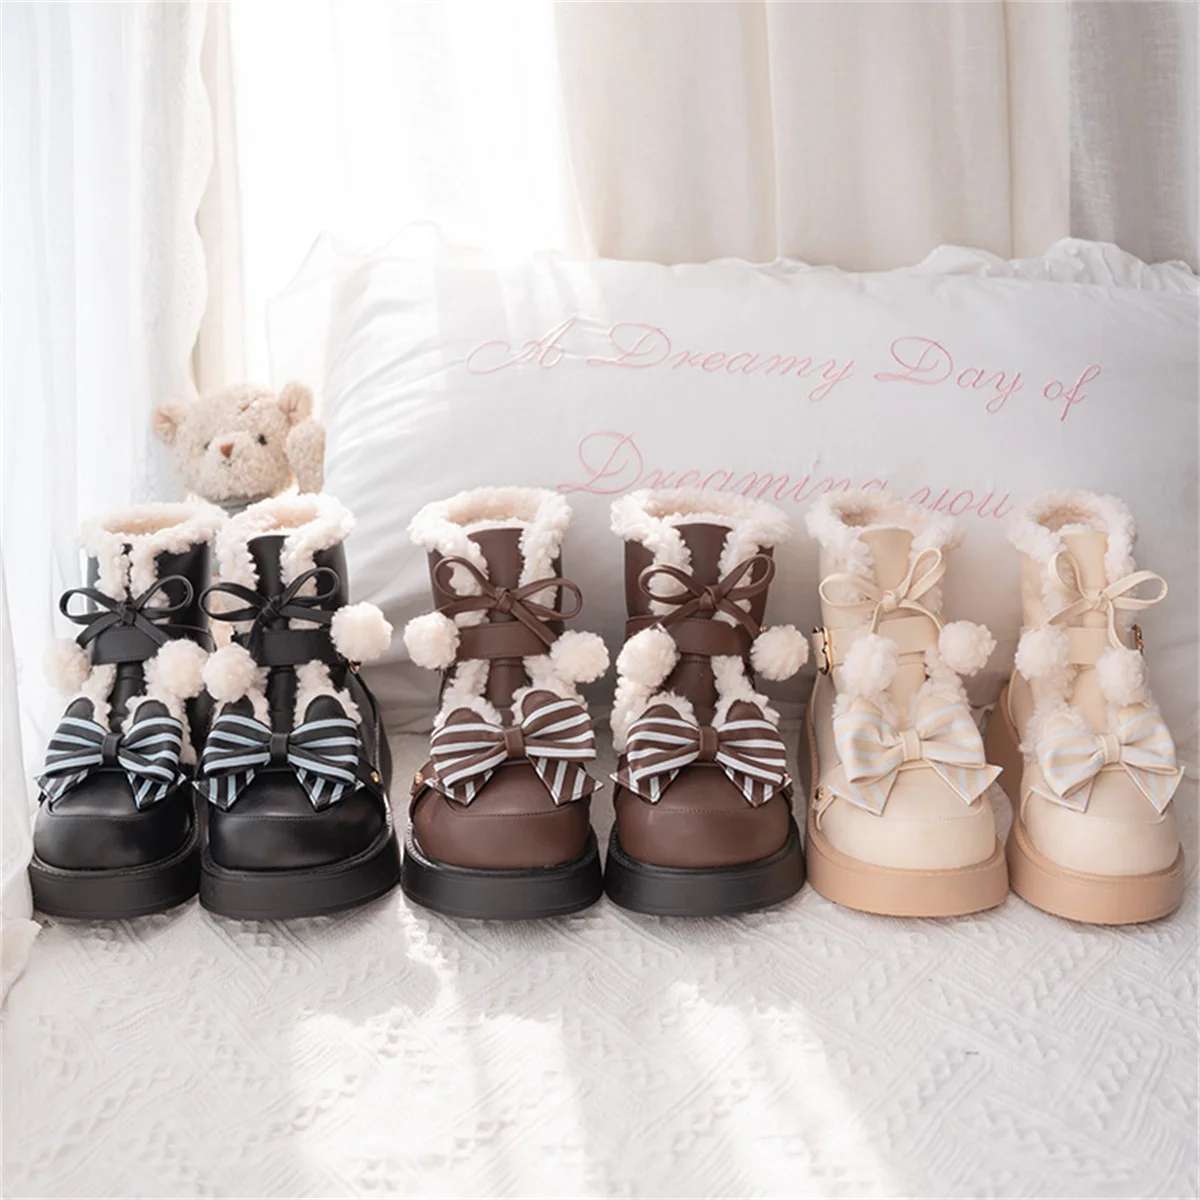 

Japanese Style Cute Girls Shoes Kawaii Lolita Winter Suede Warm Round Head Thick Soles Stripes Bow Pu 2.5-3.5cm Booties Shoes